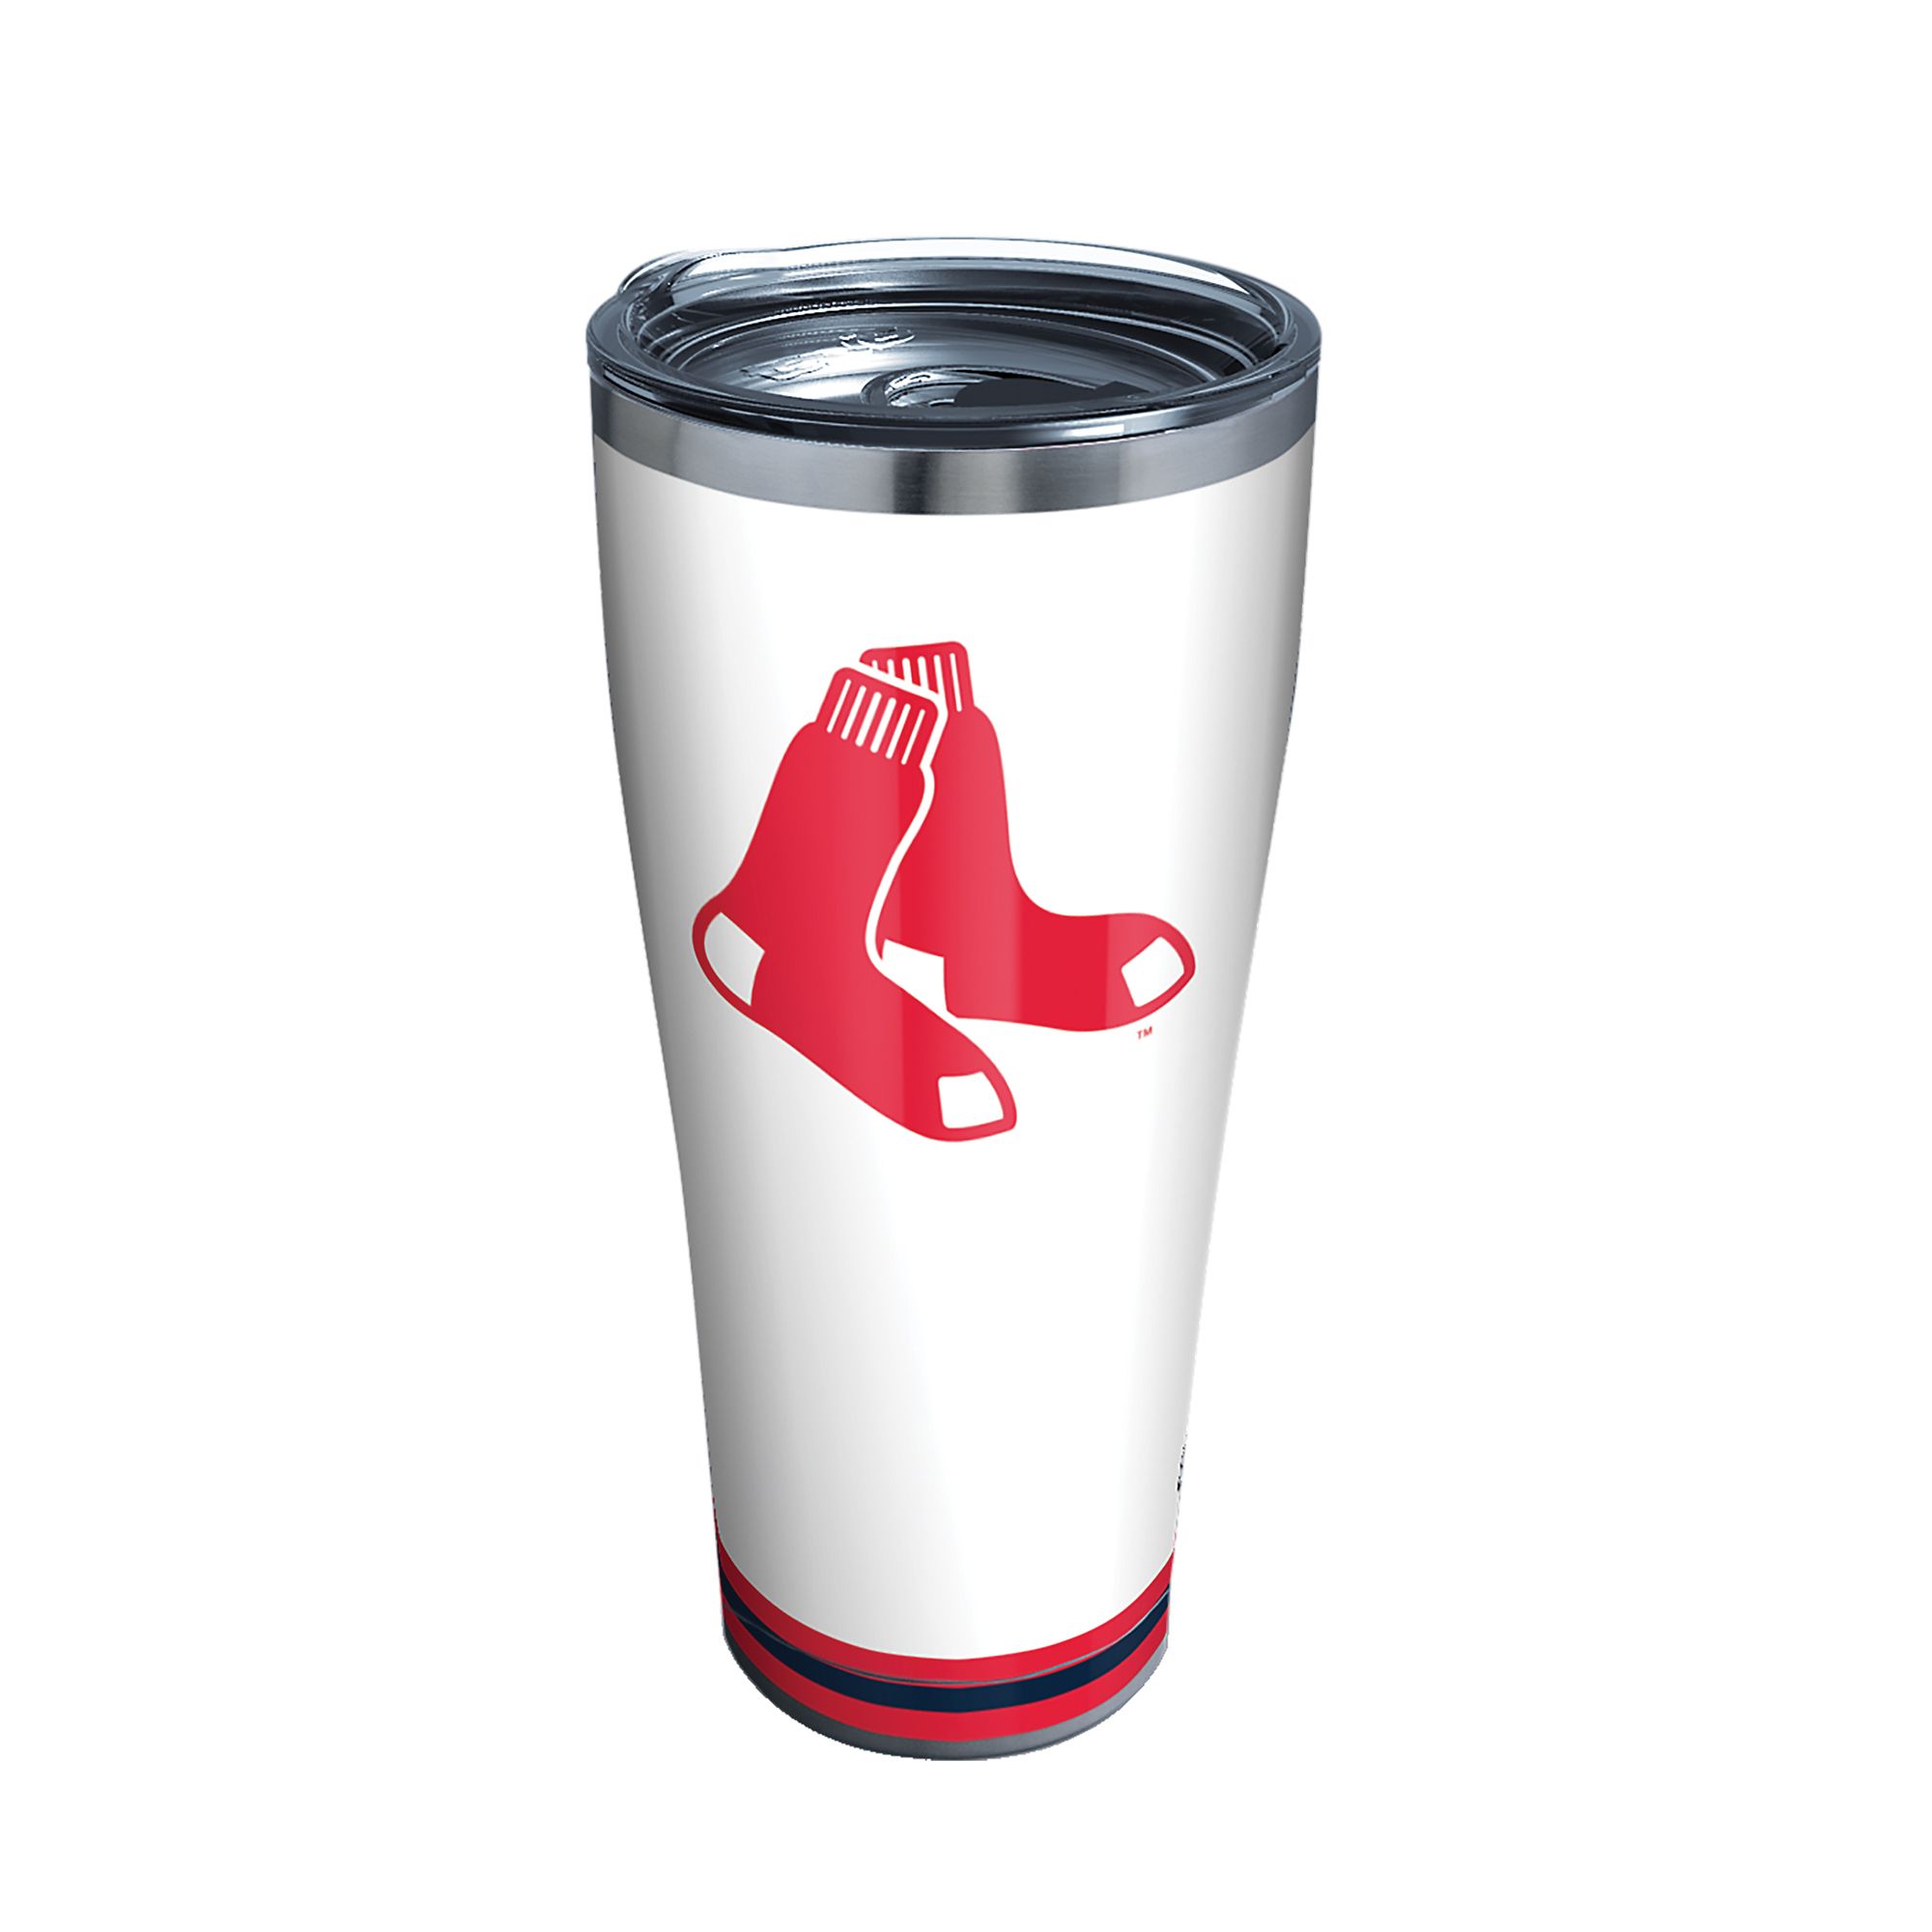 Tervis Boston Red Sox Arctic Stainless Steel 30oz. Tumbler